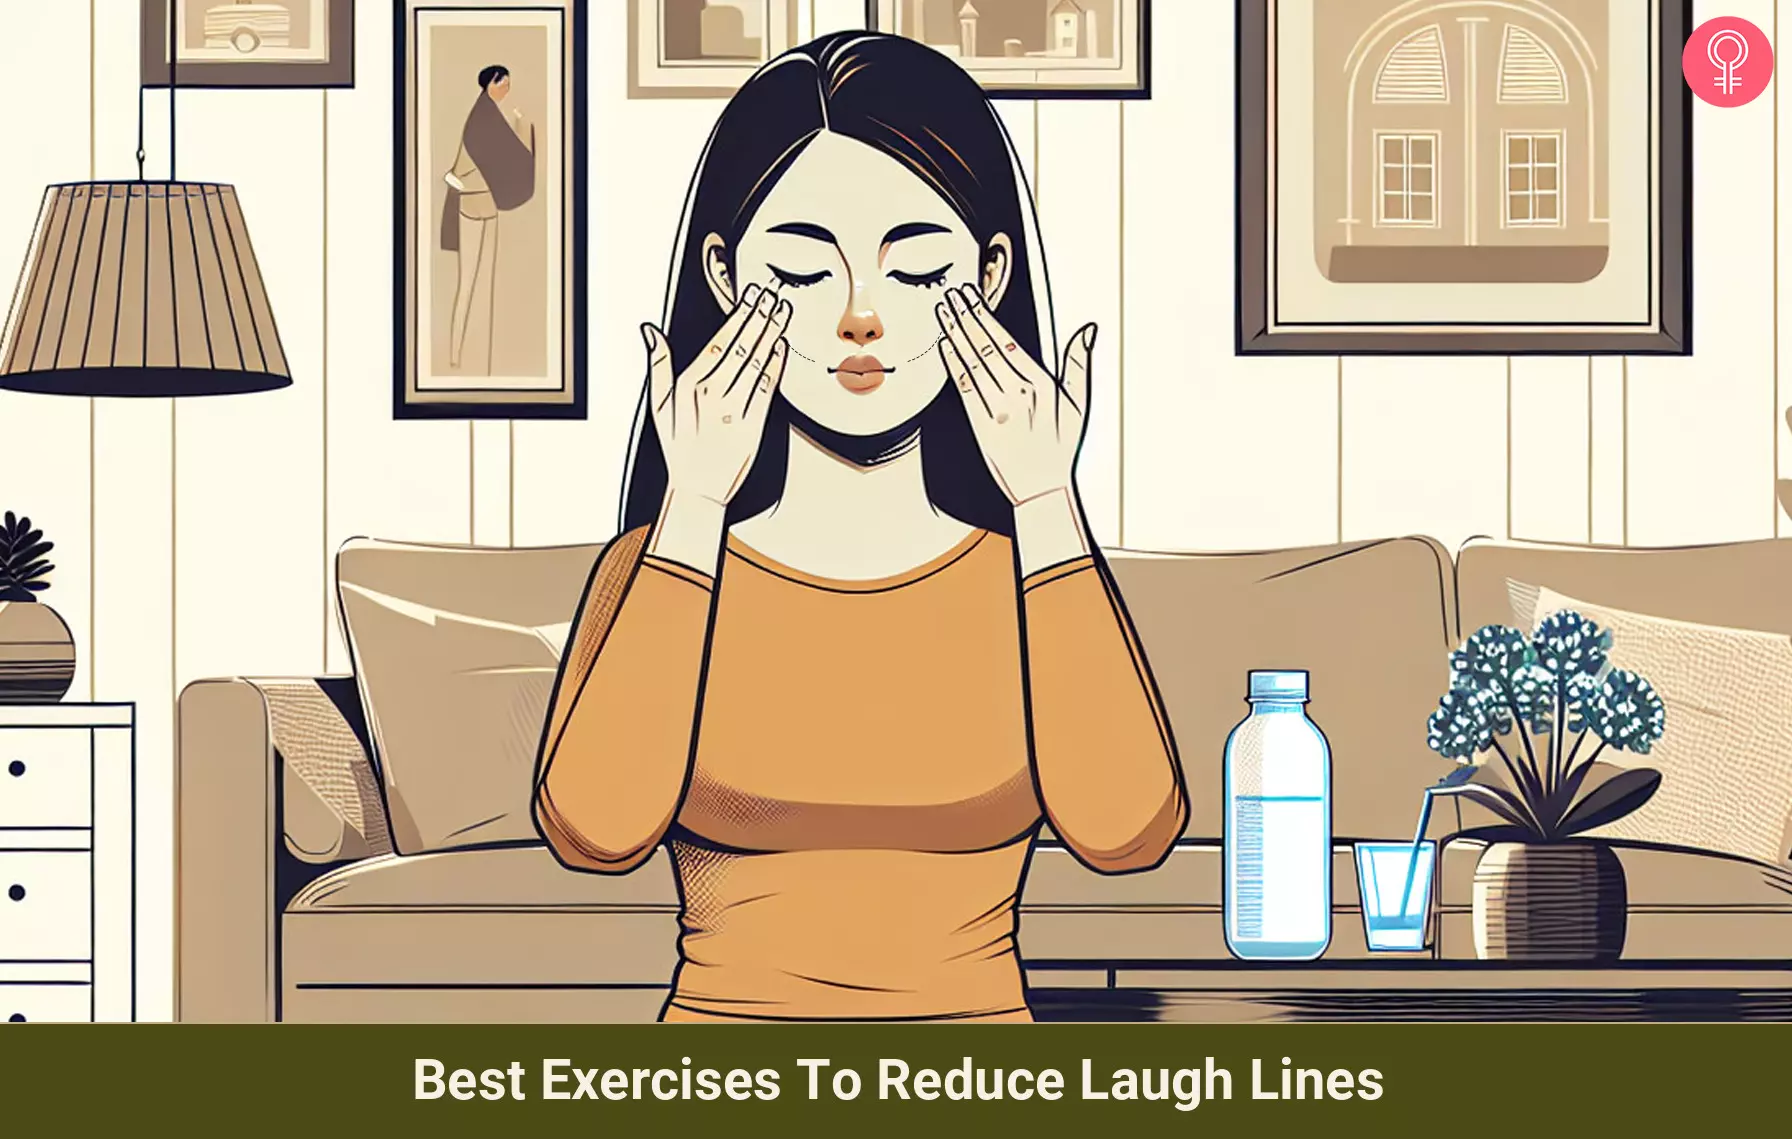 4 Best Exercises To Reduce Laugh Lines